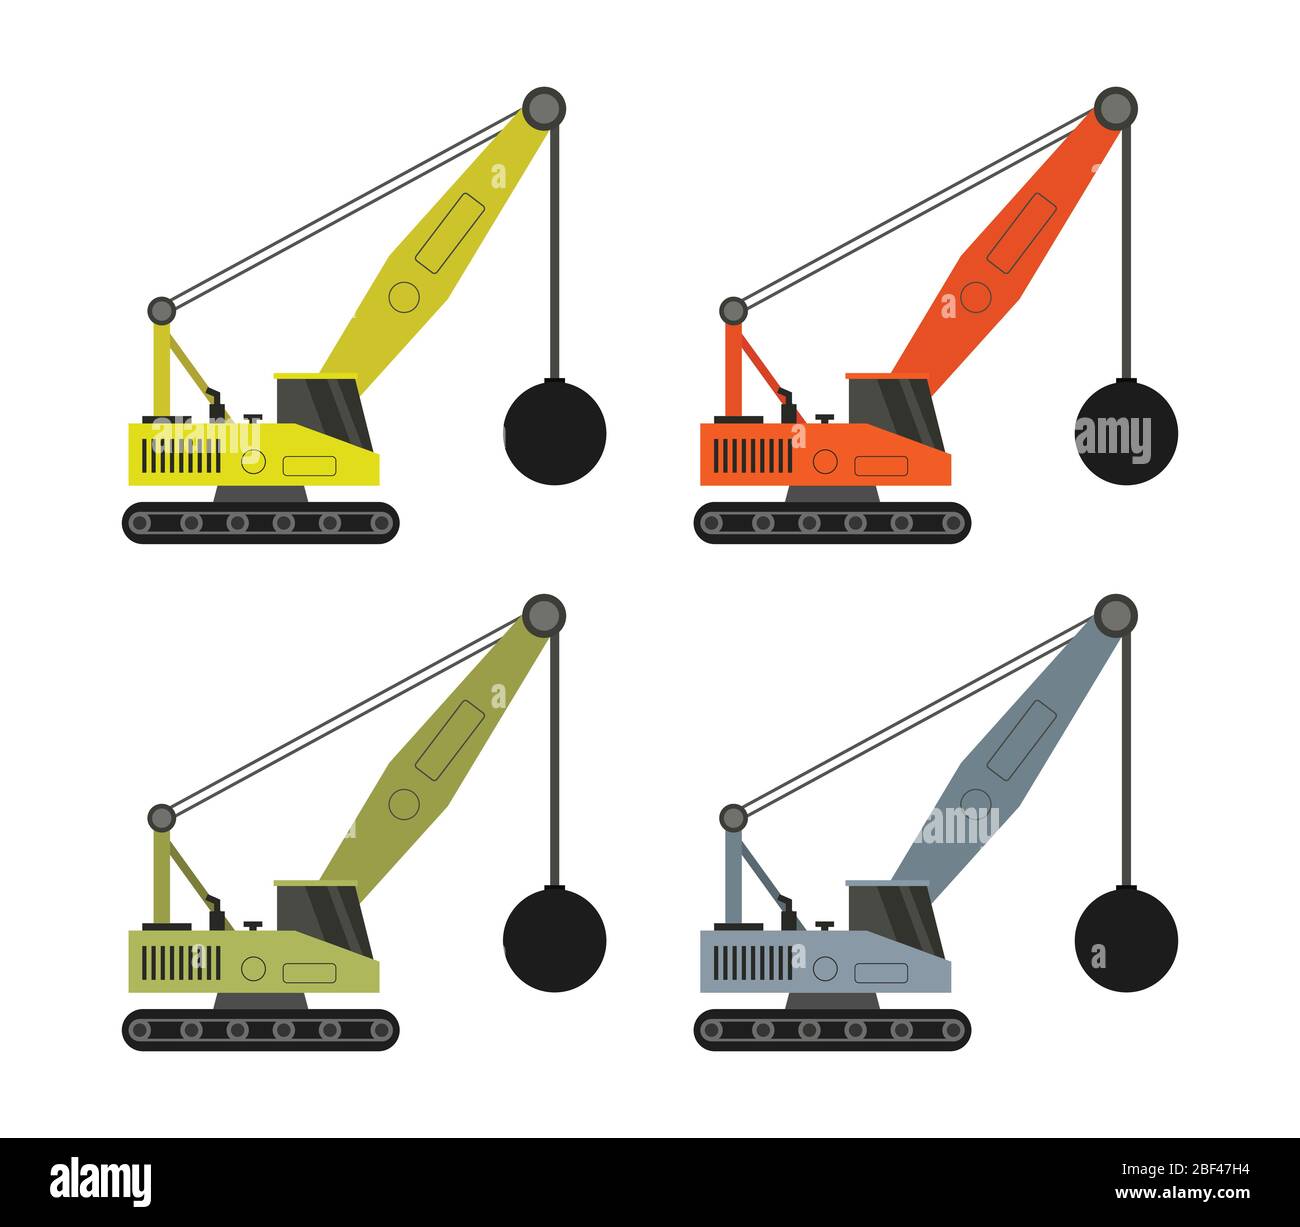 wrecking ball crane icon illustrated in vector on white background Stock Vector